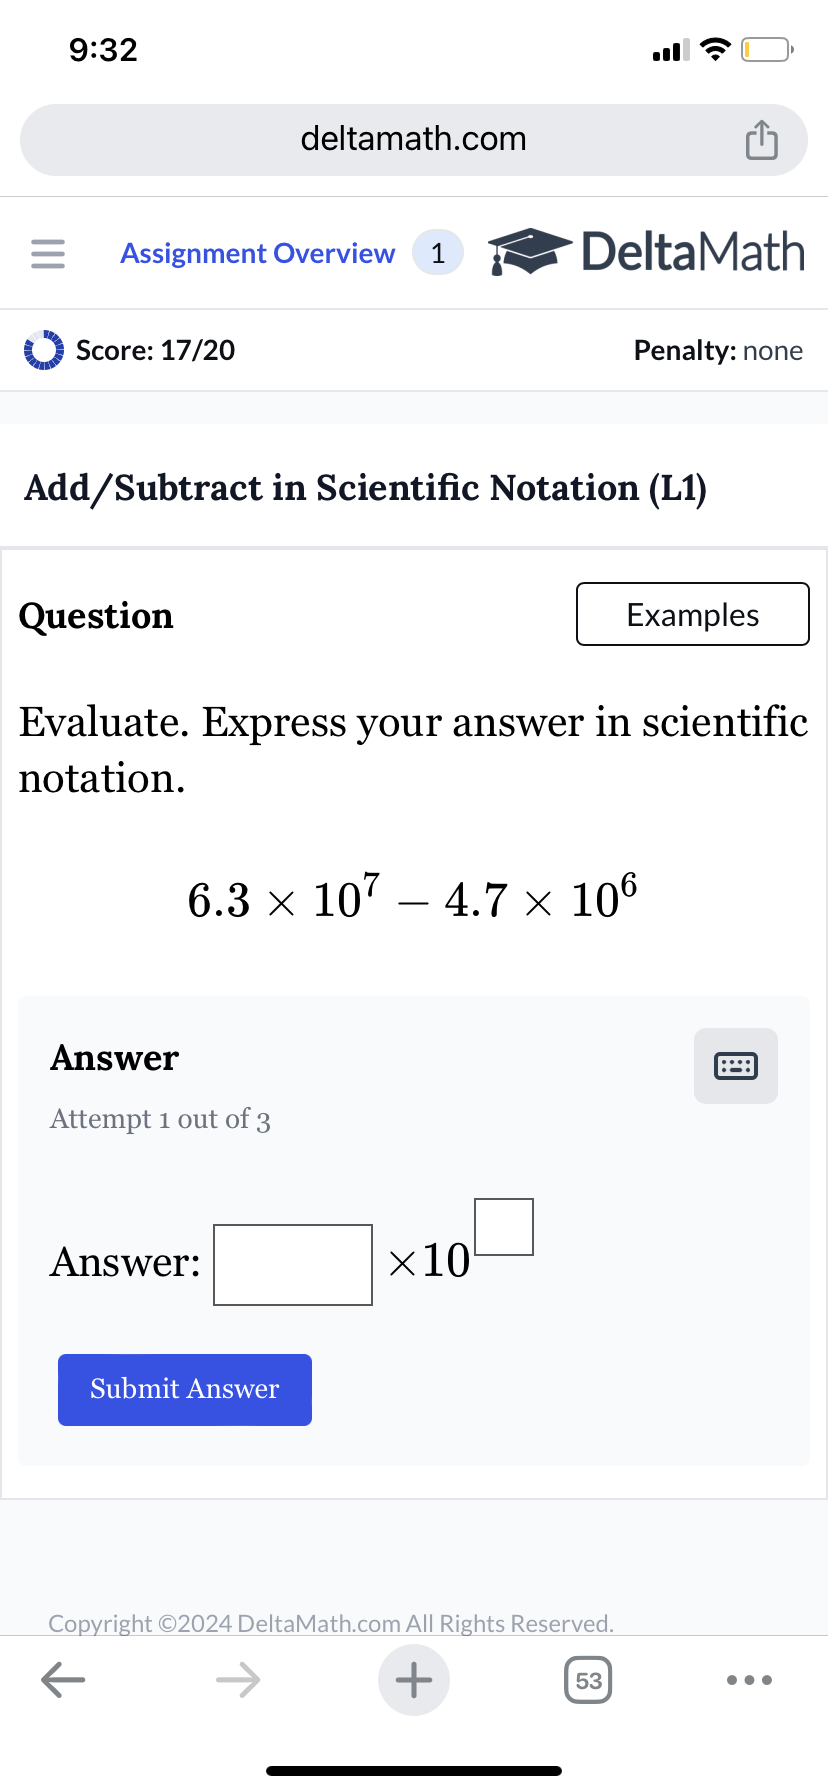 9:32
deltamath.com
= Assignment Overview 1
DeltaMath
Score: 17/20
Penalty: none
Add/Subtract in Scientific Notation (L1)
Question
Examples
Evaluate. Express your answer in scientific
notation.
6.3 × 107 - 4.7 × 106
Answer
Attempt 1 out of 3
Answer:
Submit Answer
×10
Copyright ©2024 DeltaMath.com All Rights Reserved.
←
+
53